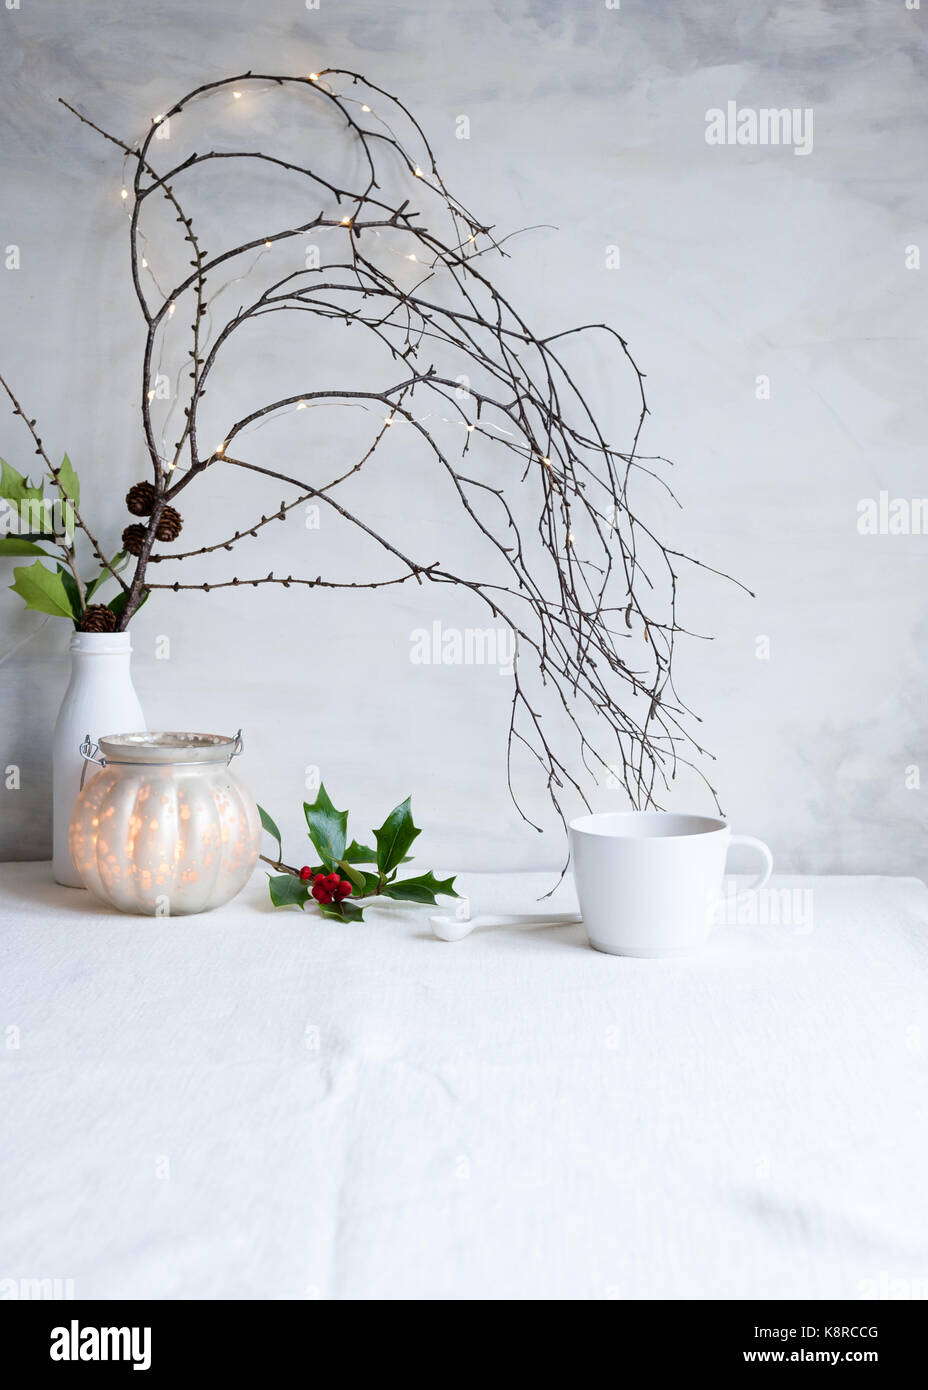 A simple Christmas arrangement with branches, twigs, fairy lights, pine cones and holly, a lit candle, and a teacup. Styled still life, natural light Stock Photo